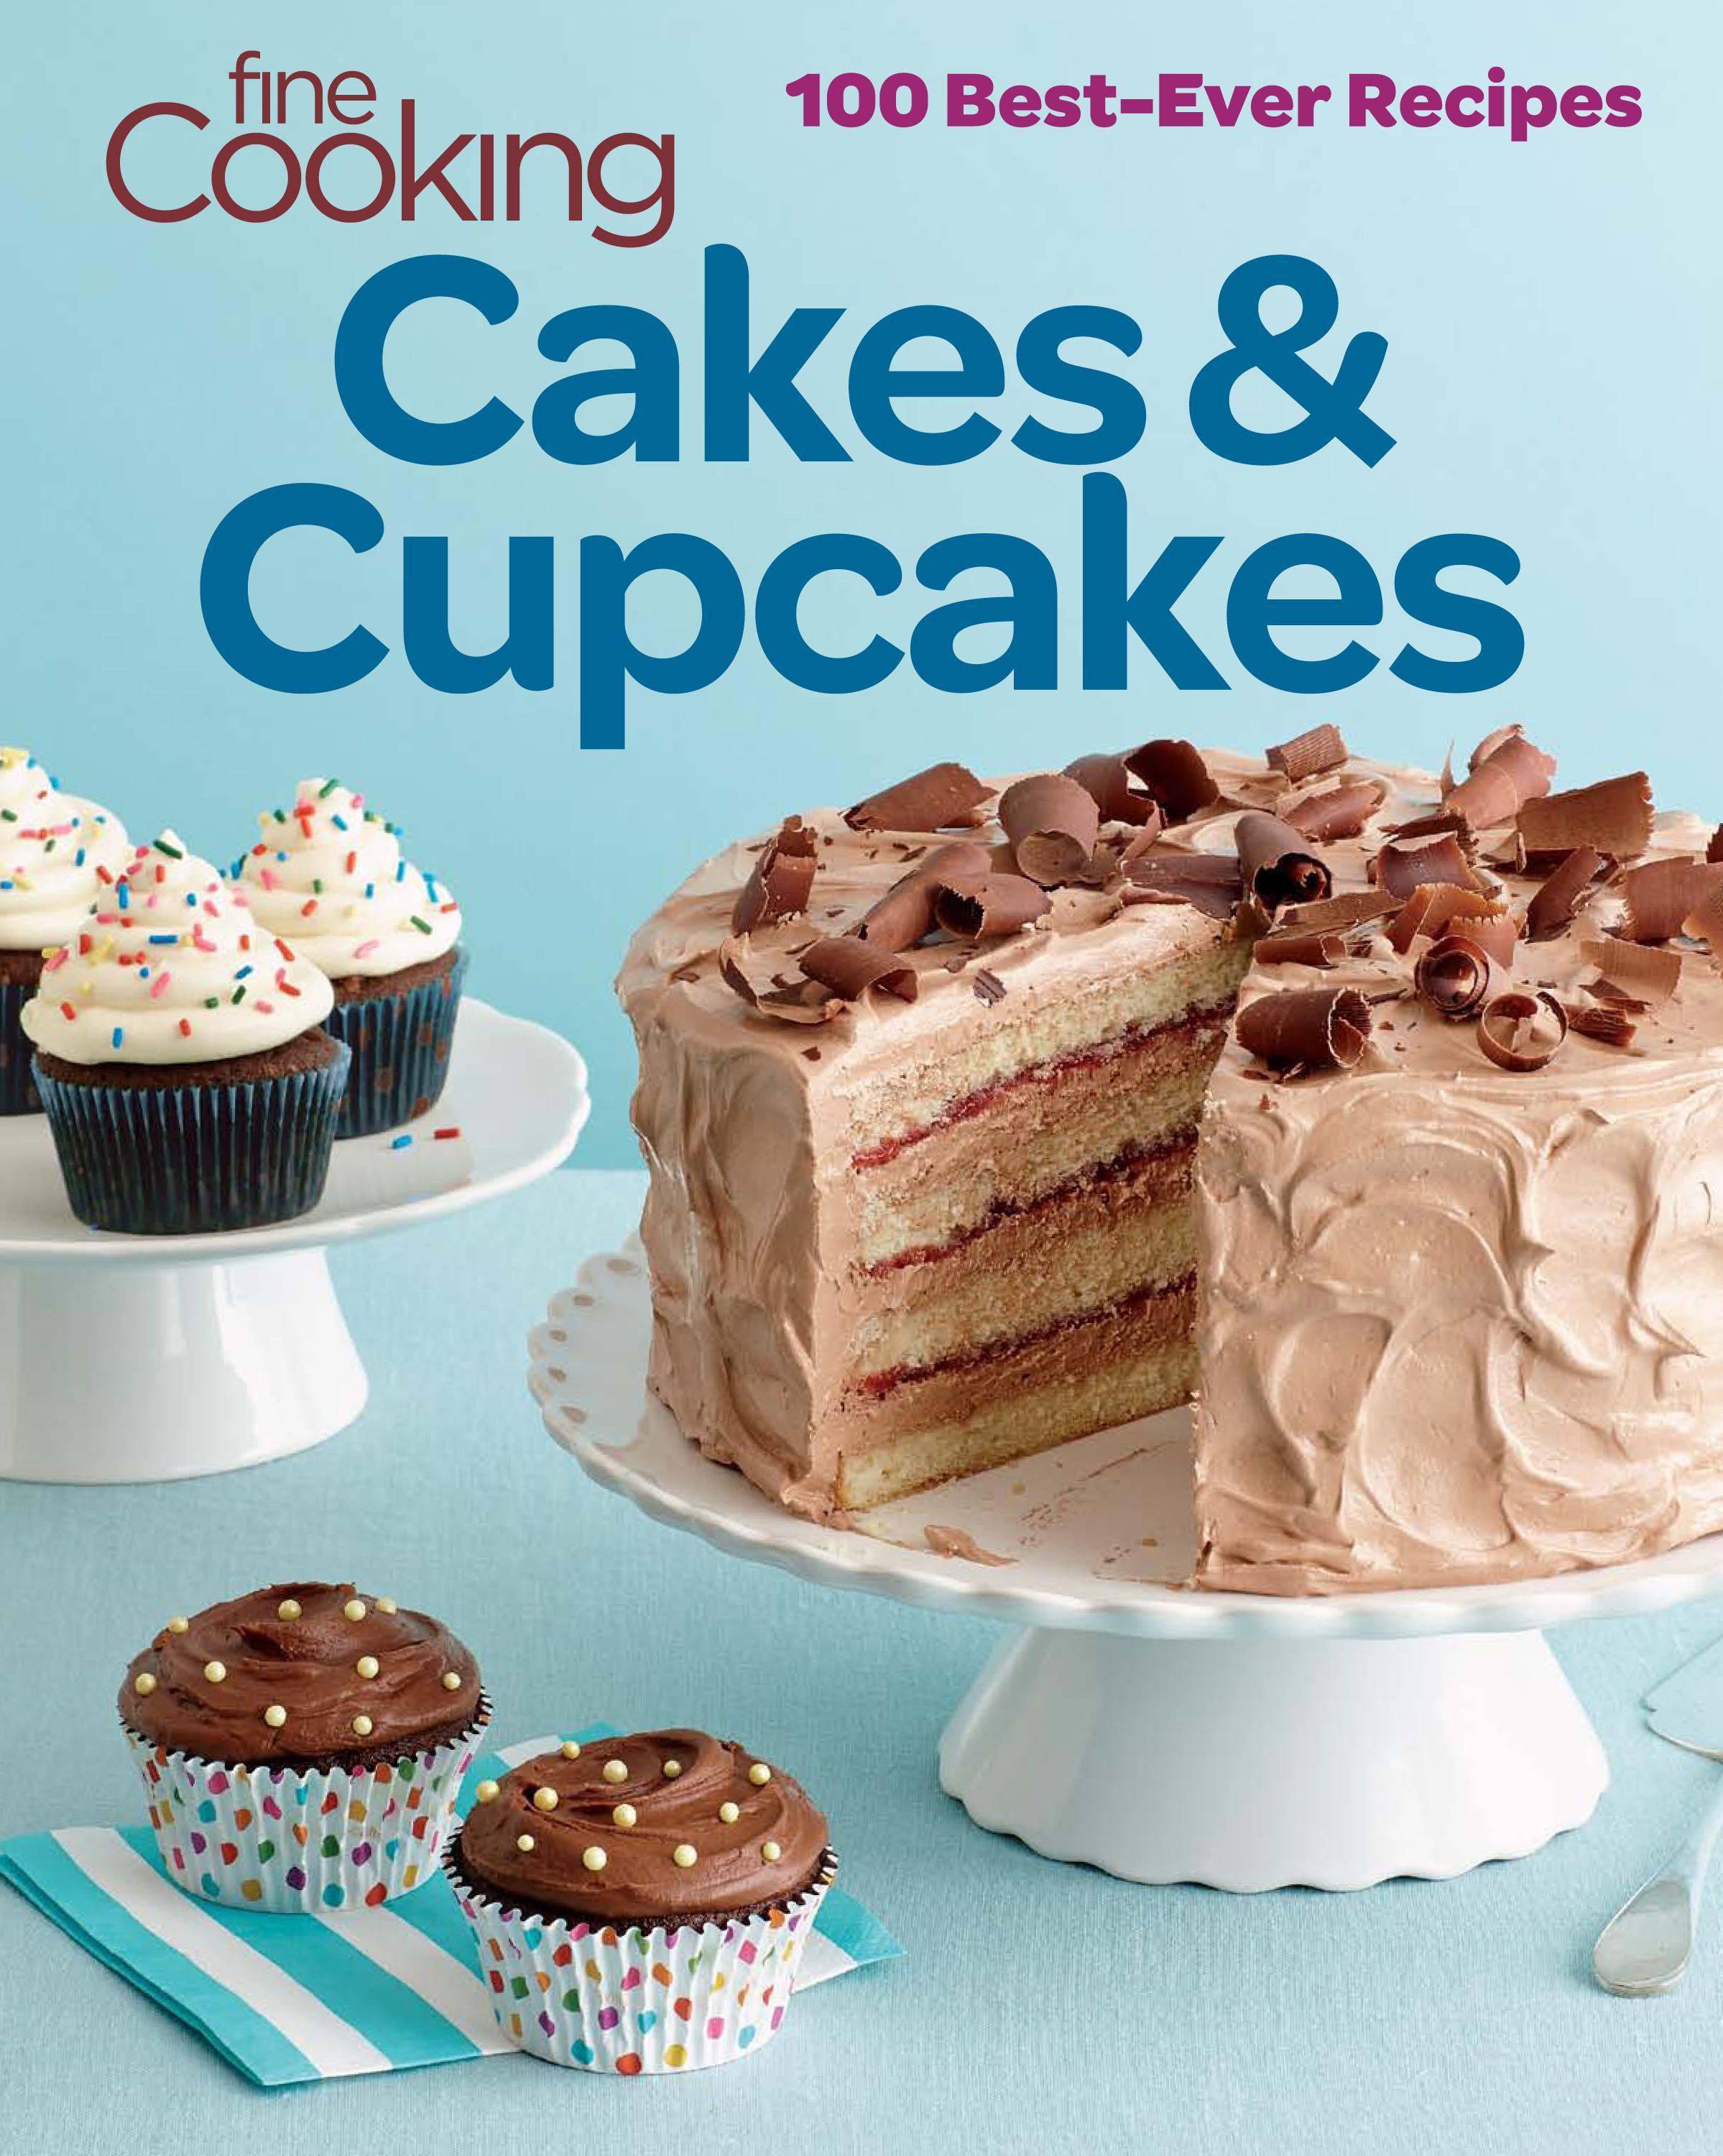 More Than Cake: 100 Baking Recipes Built for Pleasure and Community by –  Archestratus Books + Foods